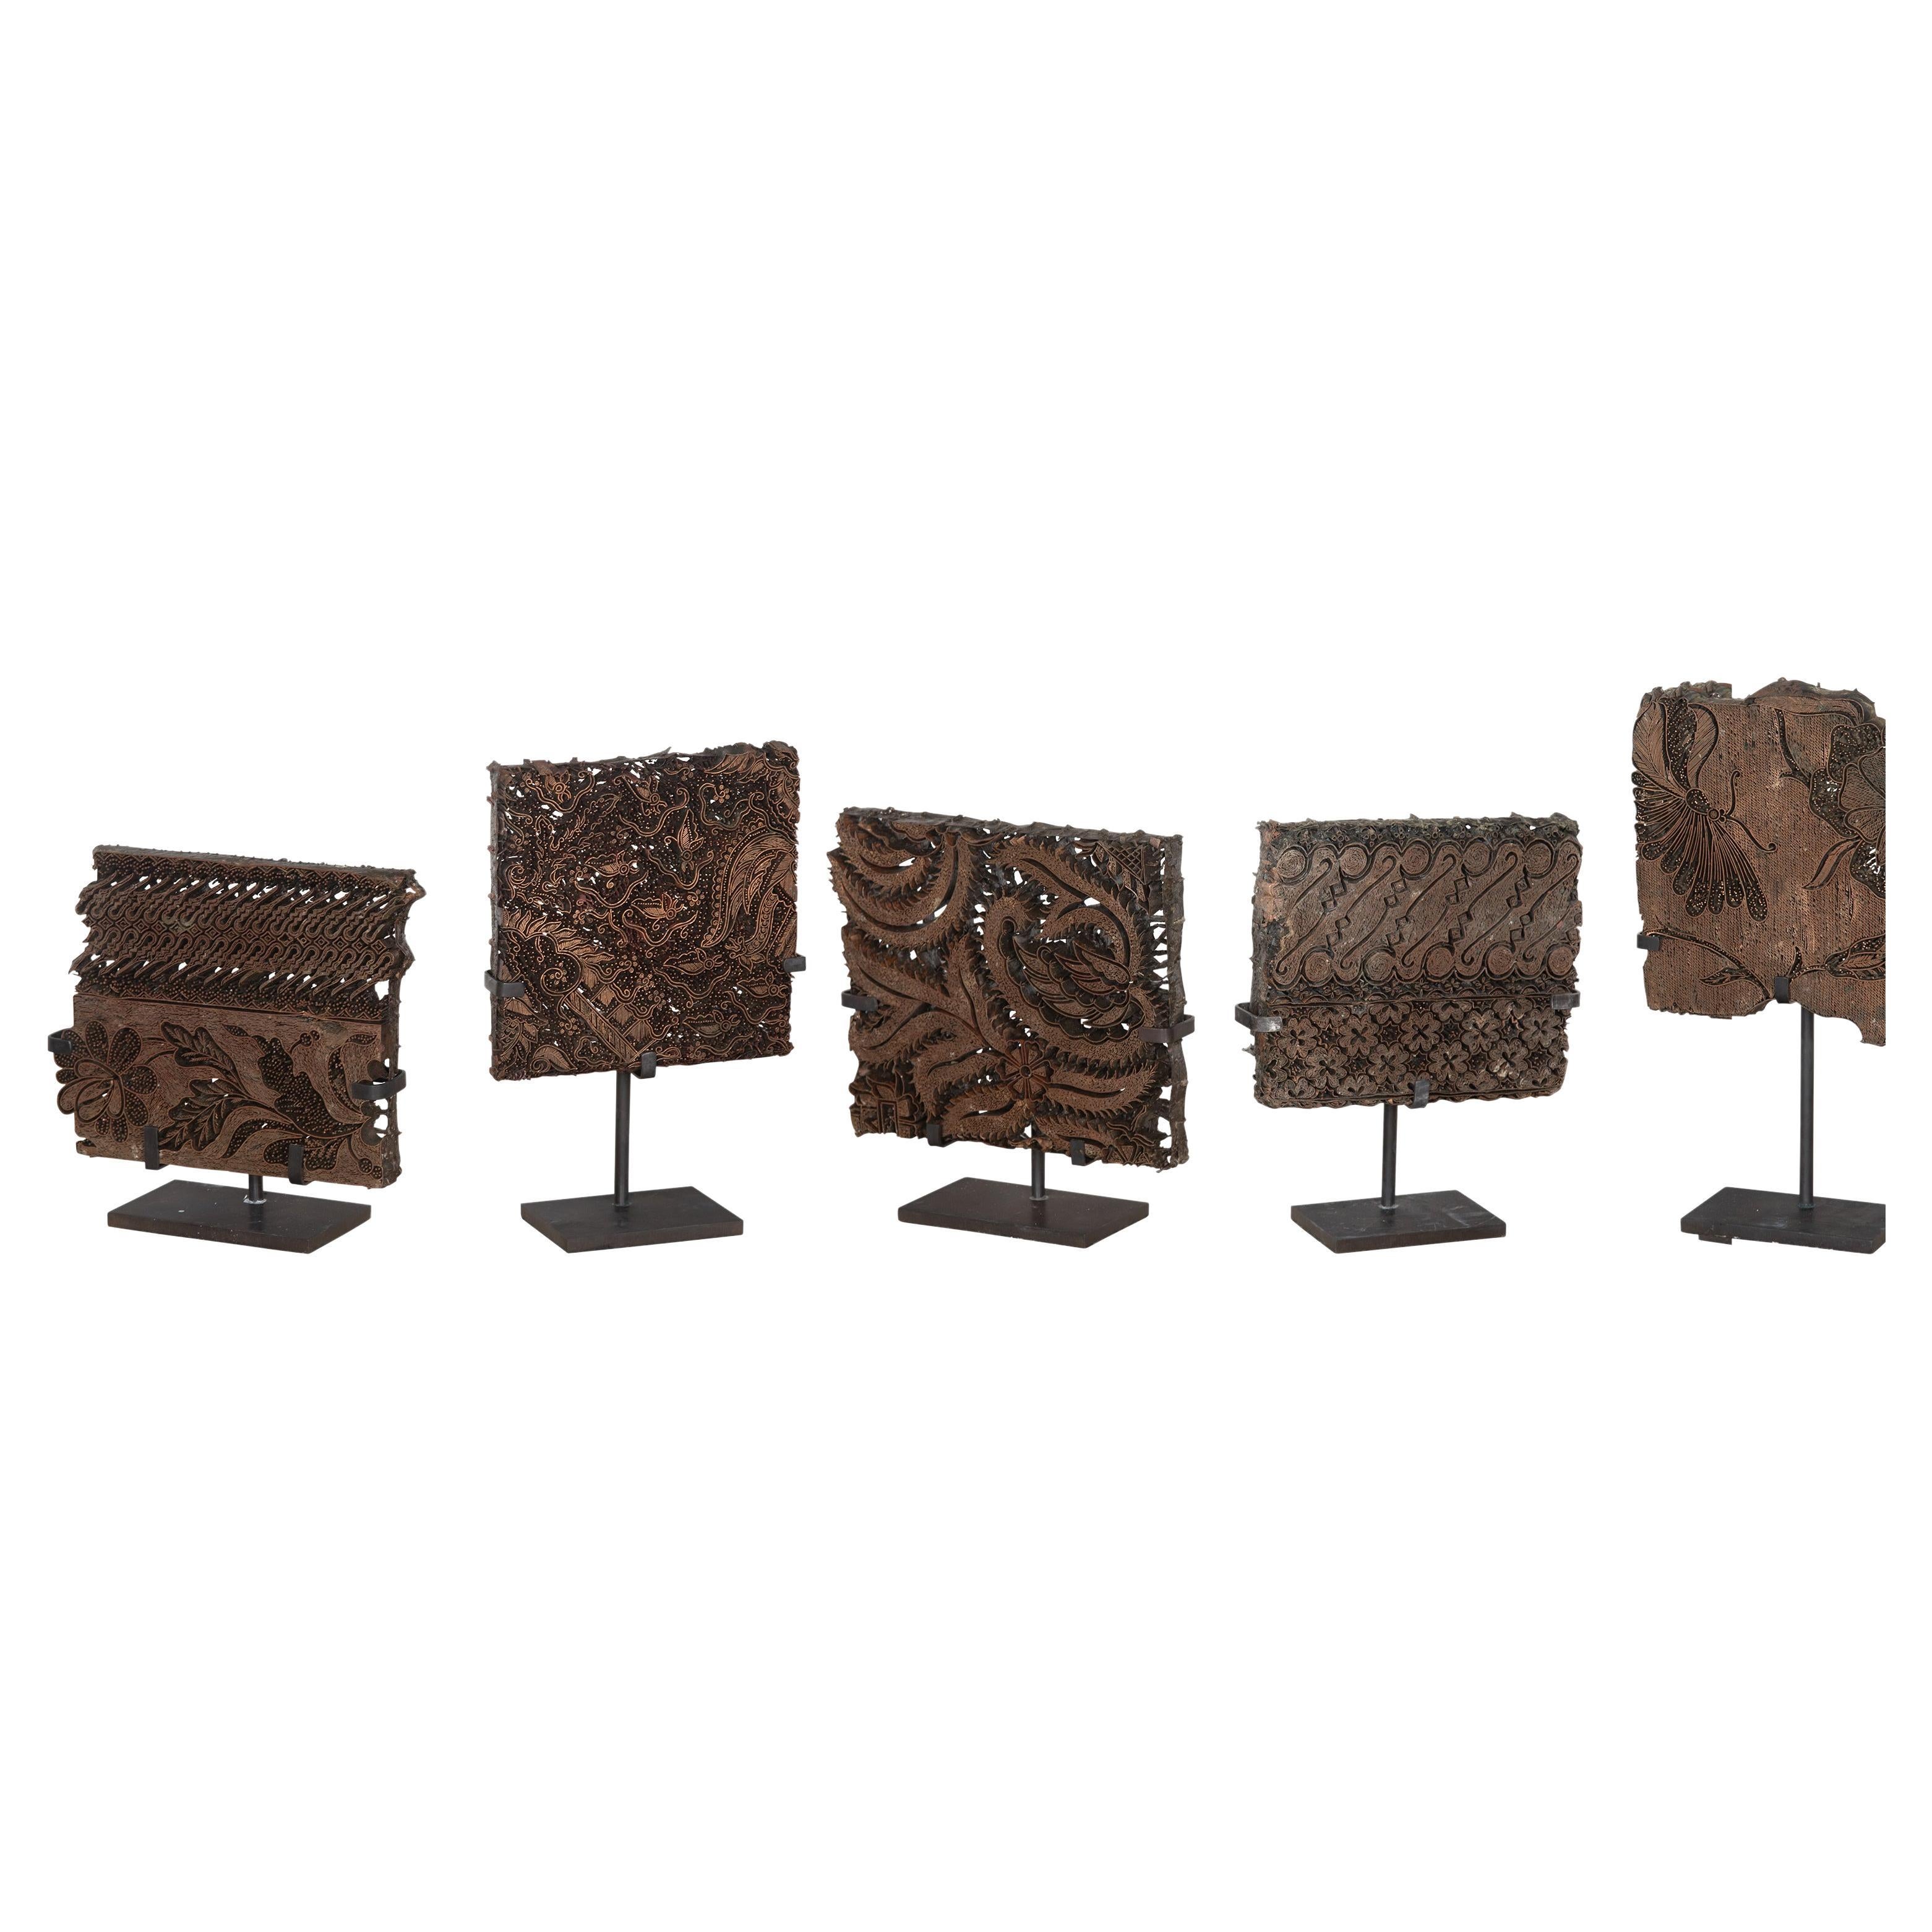 Collection of Five 19th Century Batik Printing Blocks For Sale